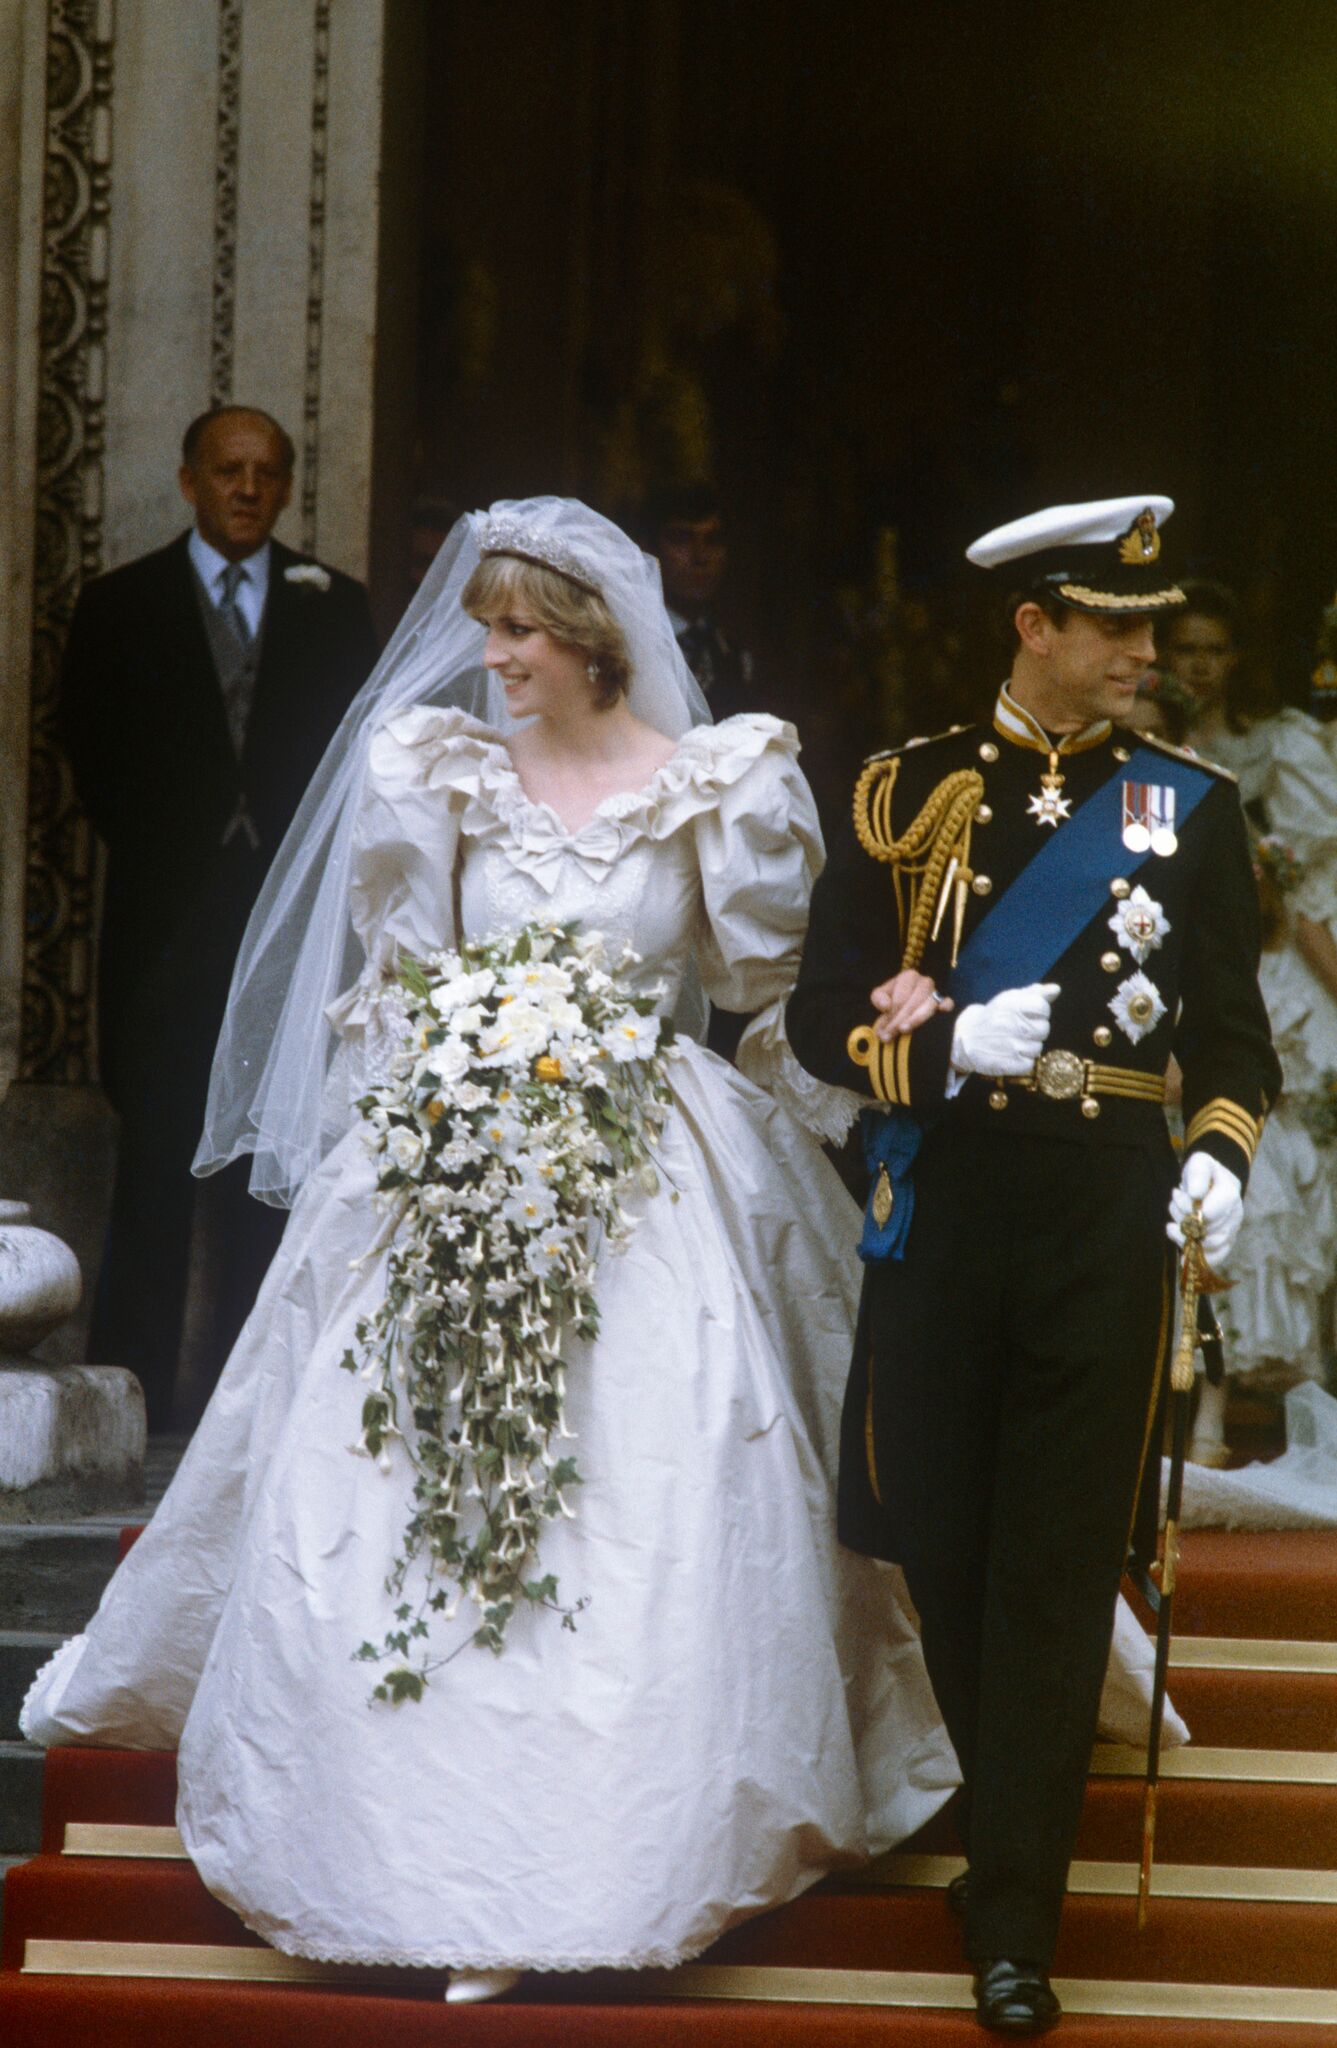 Princess Diana and Prince Charles leaving the church on their wedding day | Photo : Getty Images